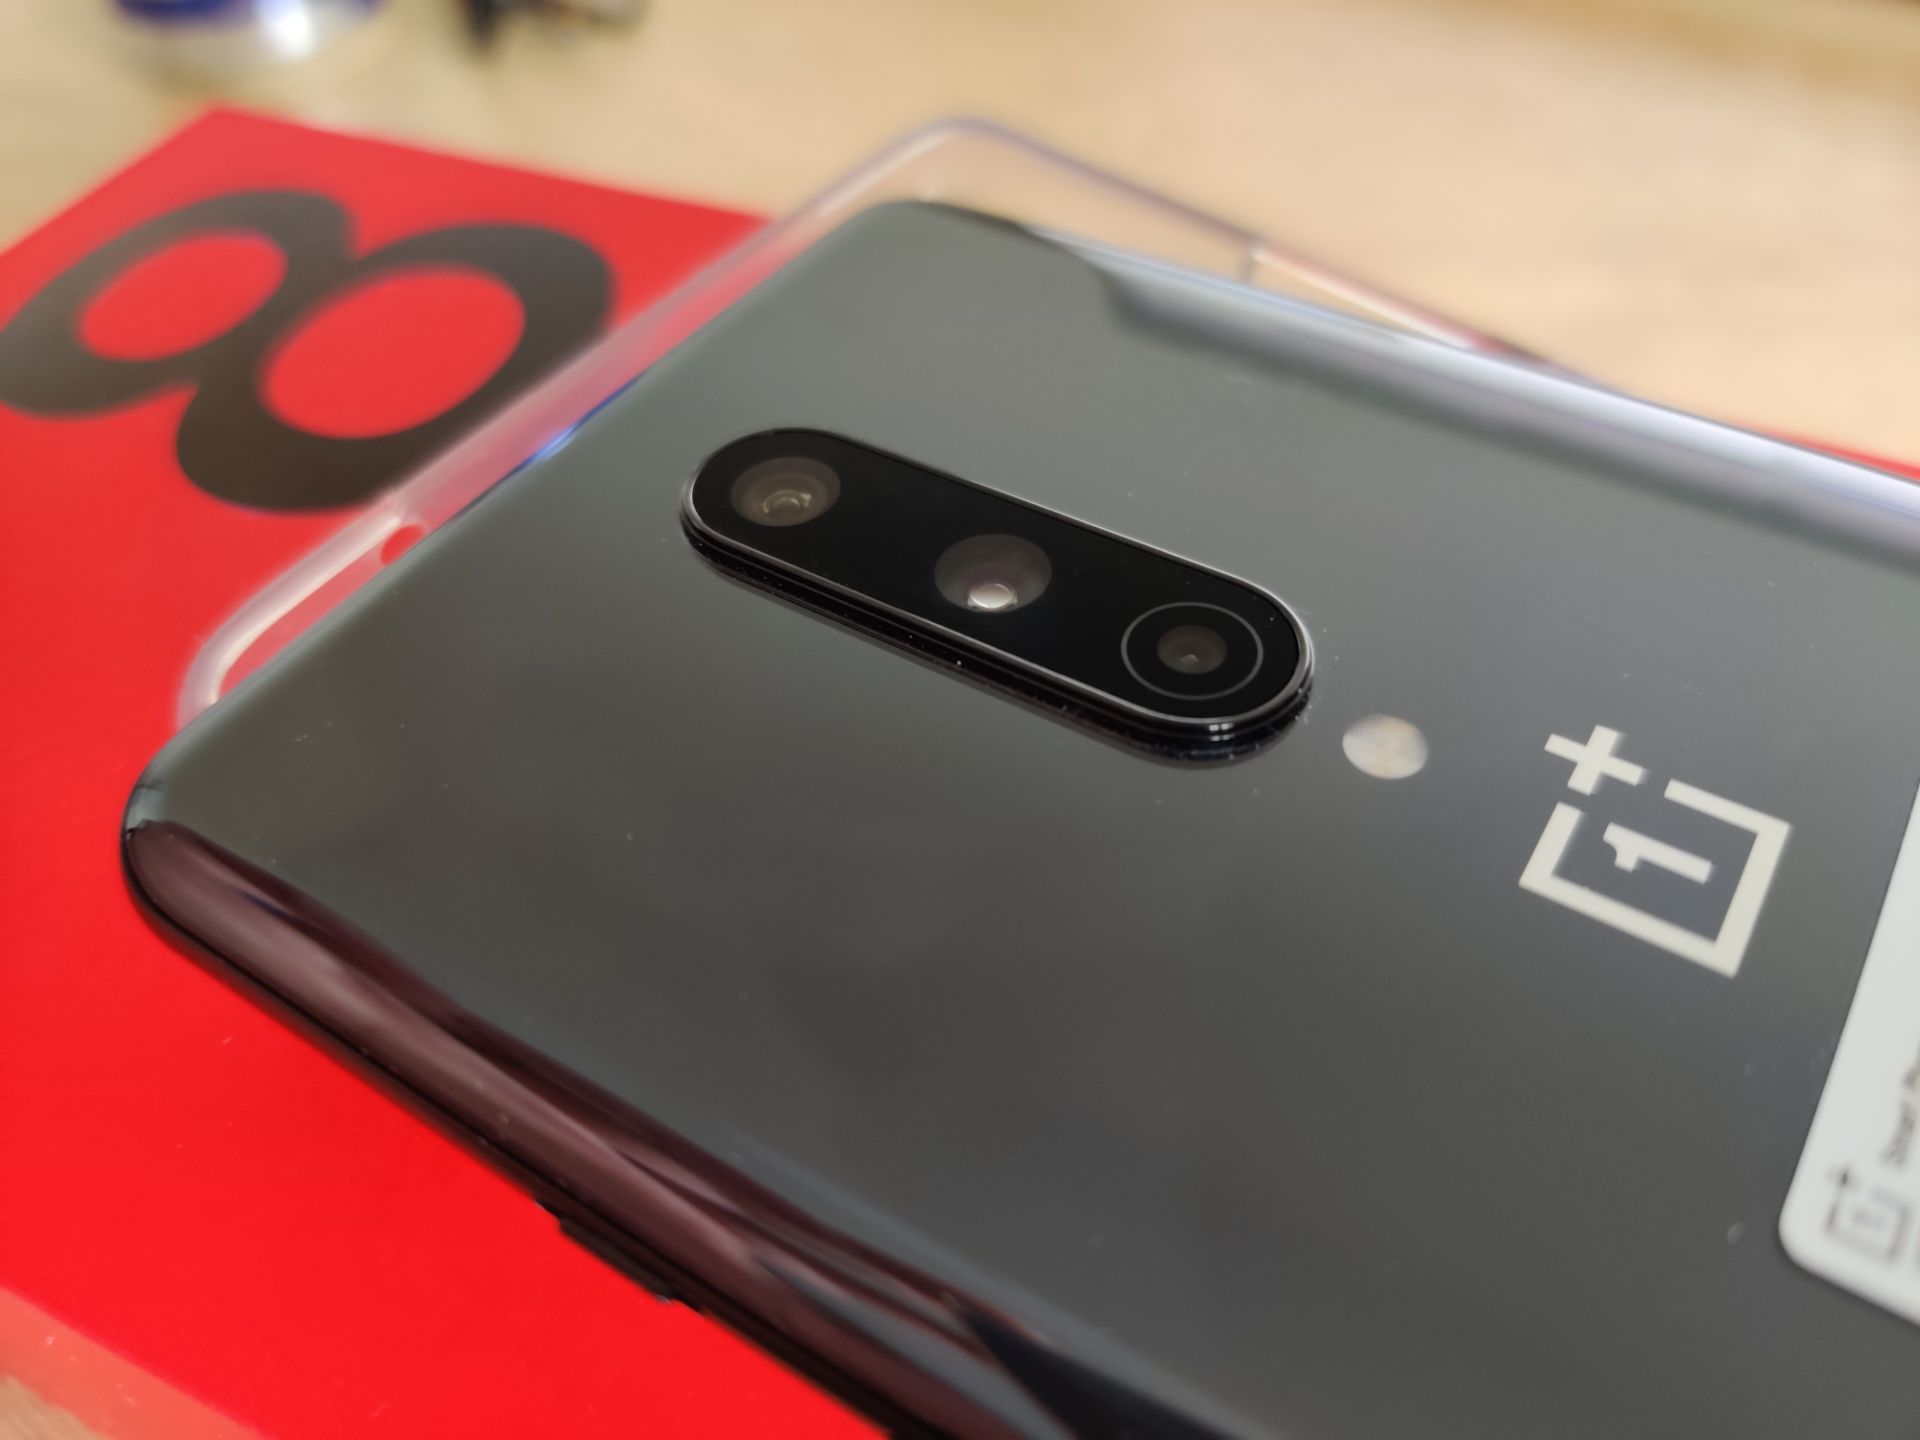 LIKE NEW! IMMACULATE CONDITION! ONEPLUS 8 128GB BLACK, UNLOCKED SMARTPHONE - LESS THAN A MONTH OLD! - Image 8 of 8